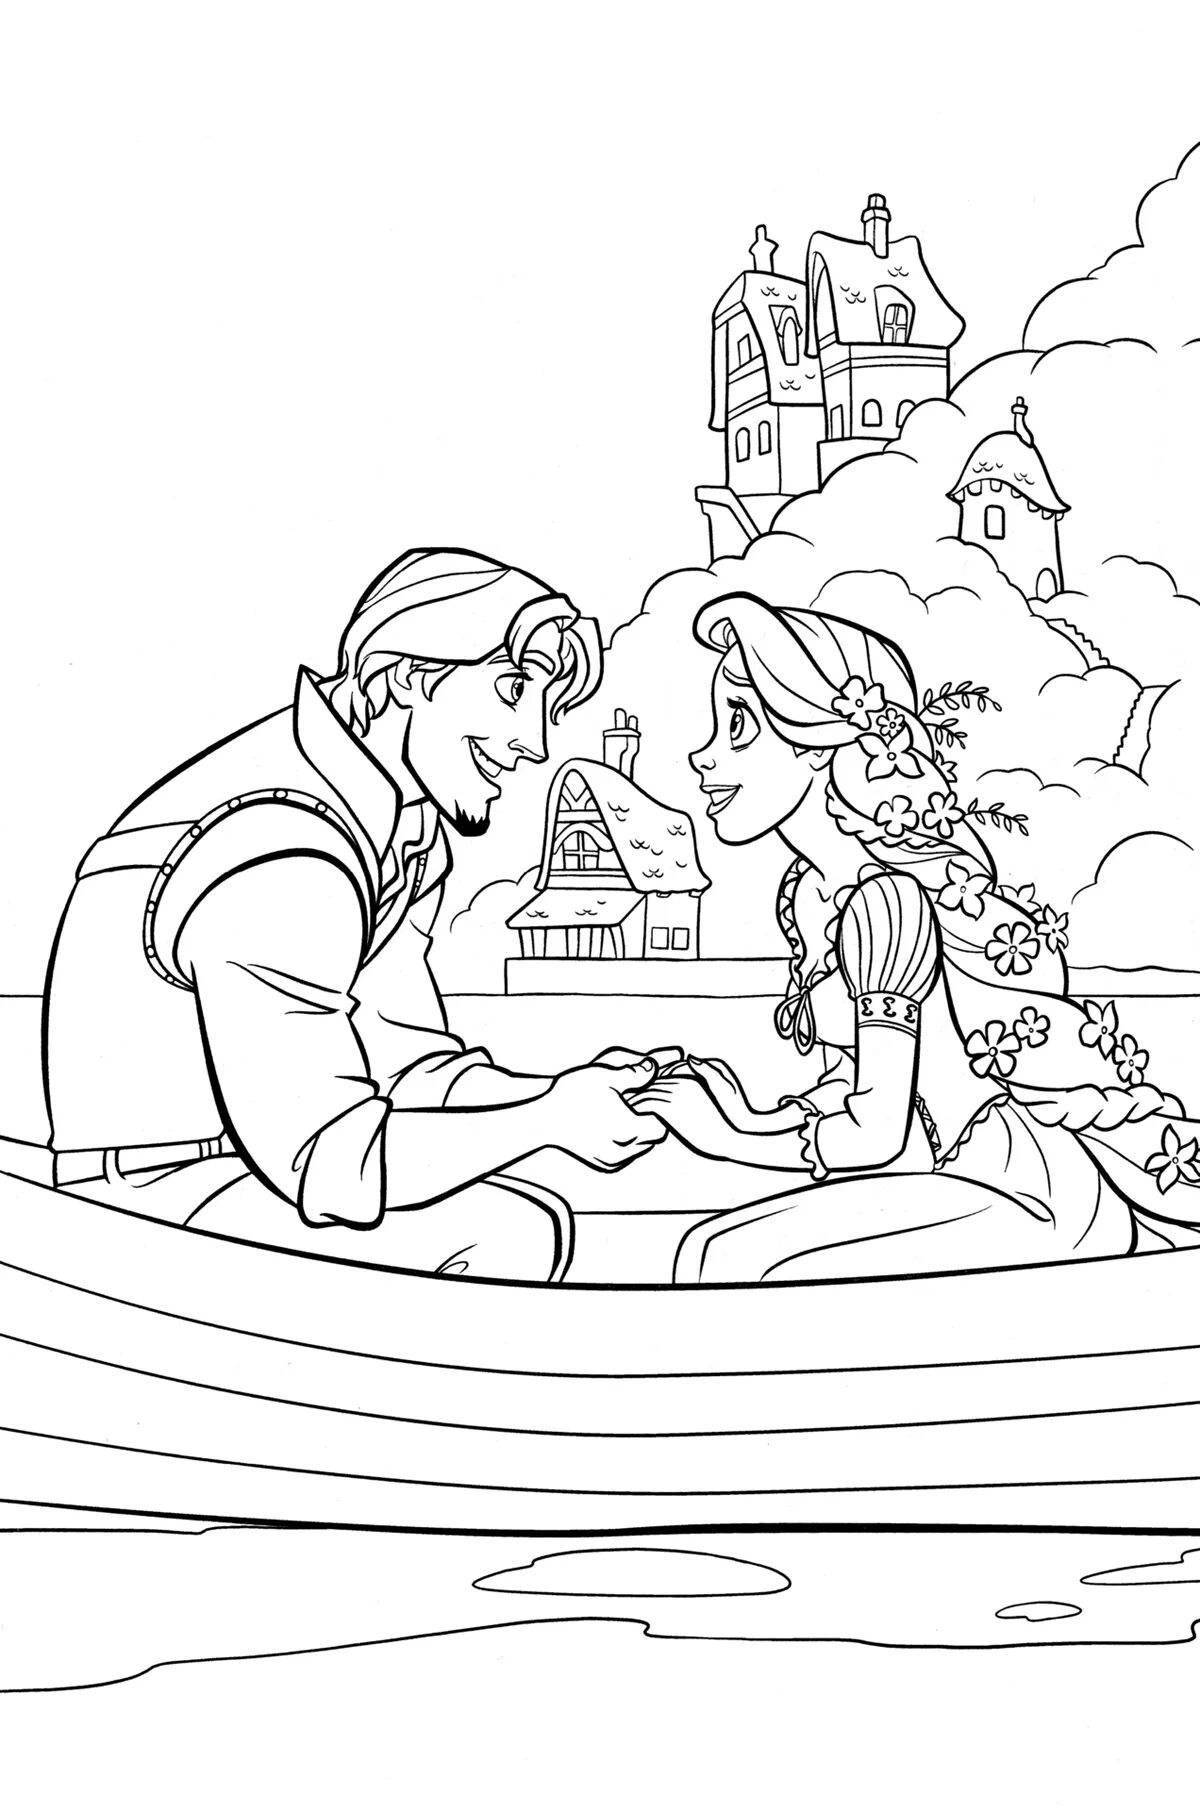 Generous coloring of rapunzel and eugene